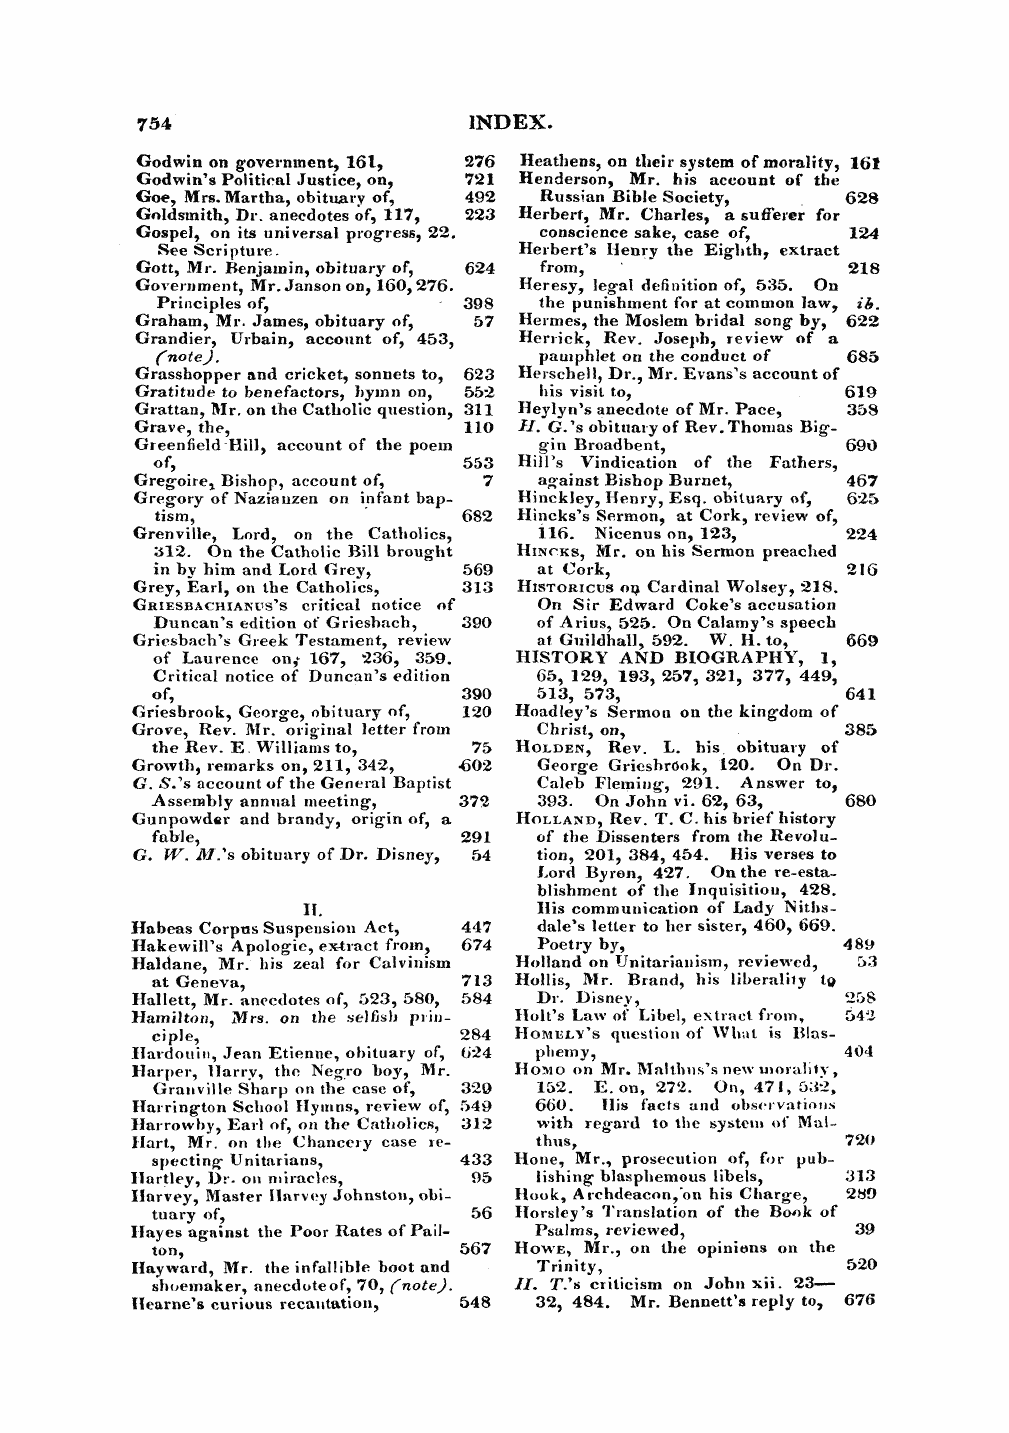 Monthly Repository (1806-1838) and Unitarian Chronicle (1832-1833): F Y, 1st edition, End matter: 8